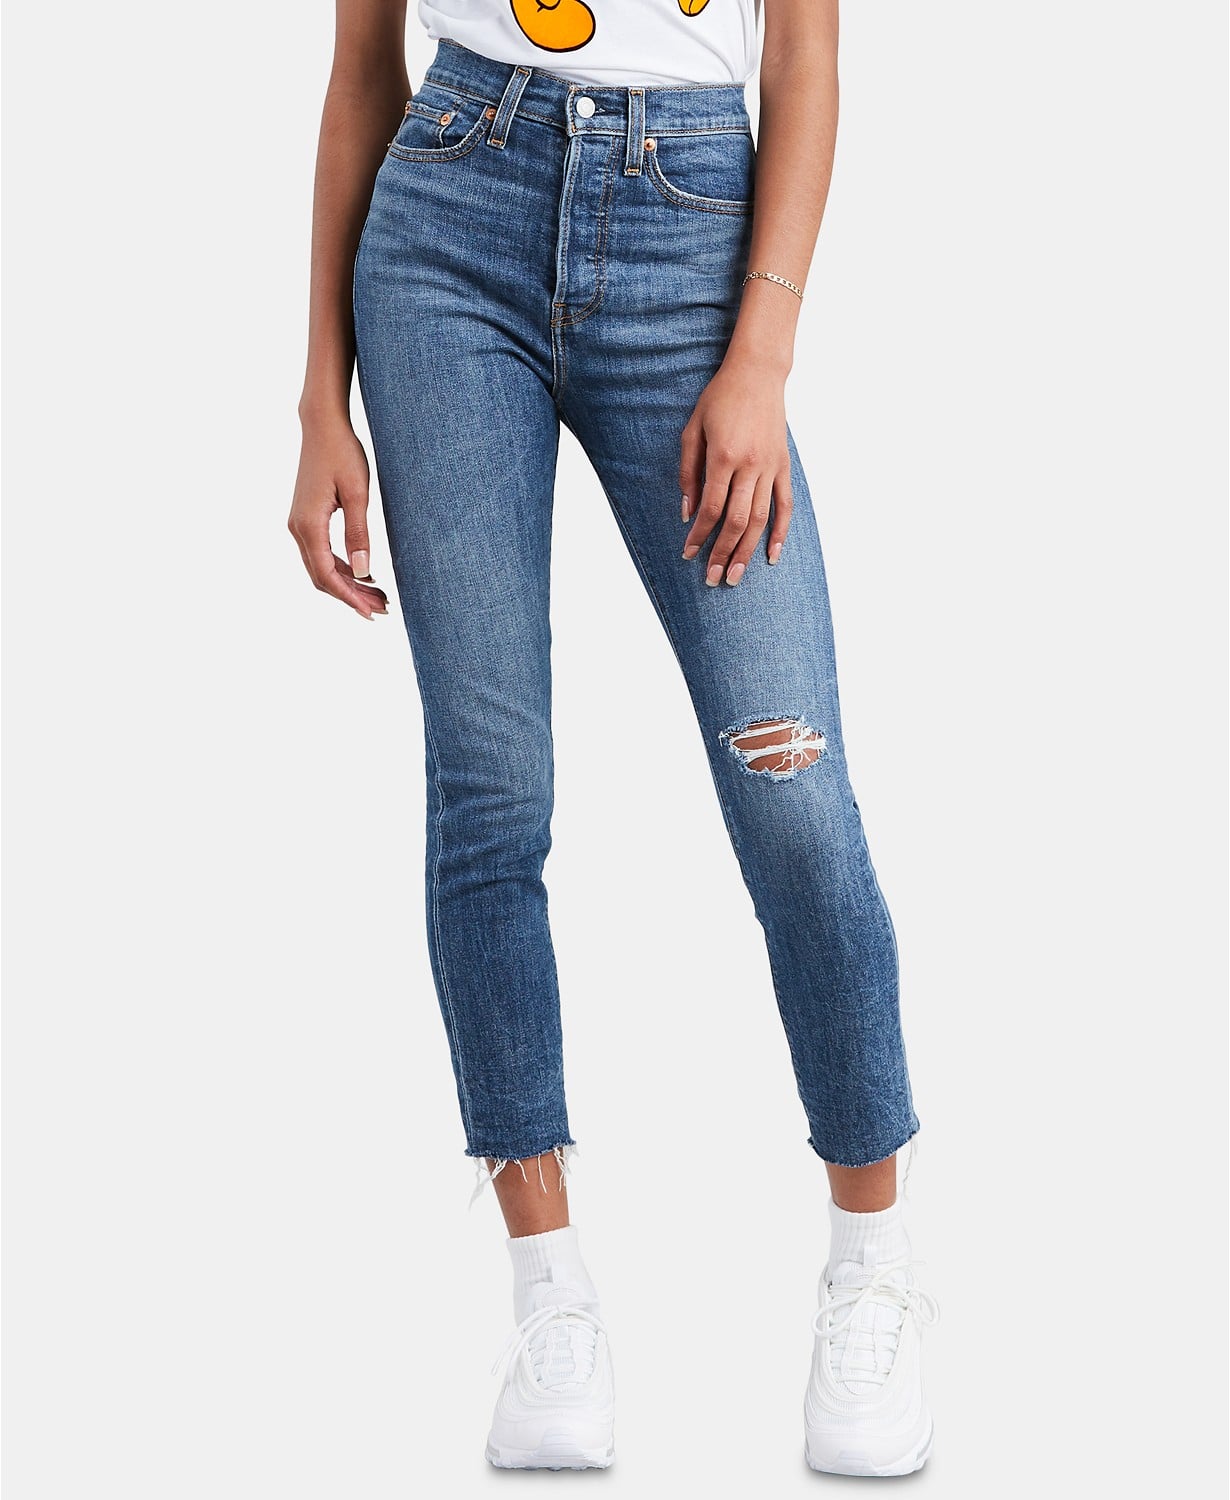 Levi's Ripped Skinny Wedgie Jeans | 50 